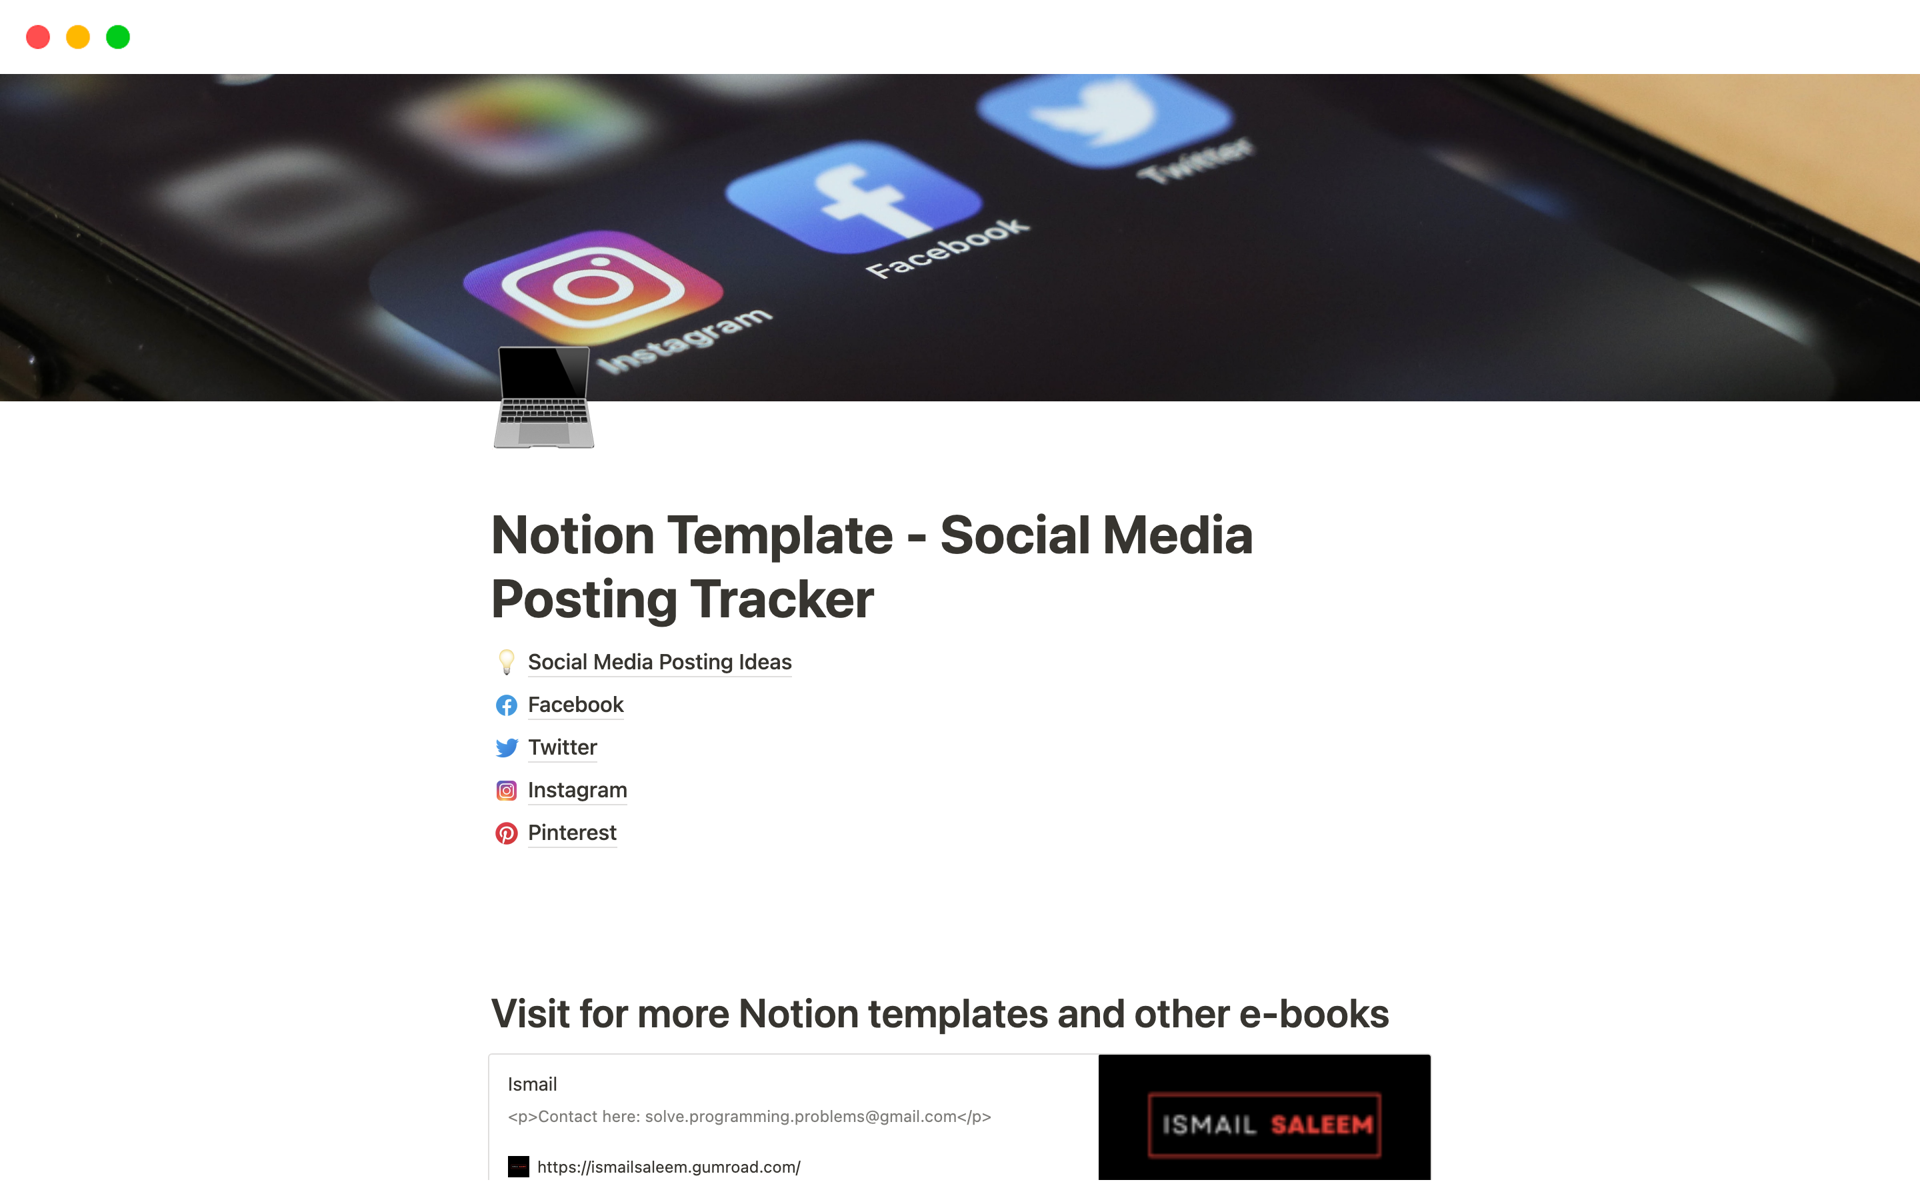 Level up your social media game with our "Notion Template for Social Media Posting Tracker"! This comprehensive and user-friendly template is designed to help you streamline and organize your social media posting strategy like never before. 